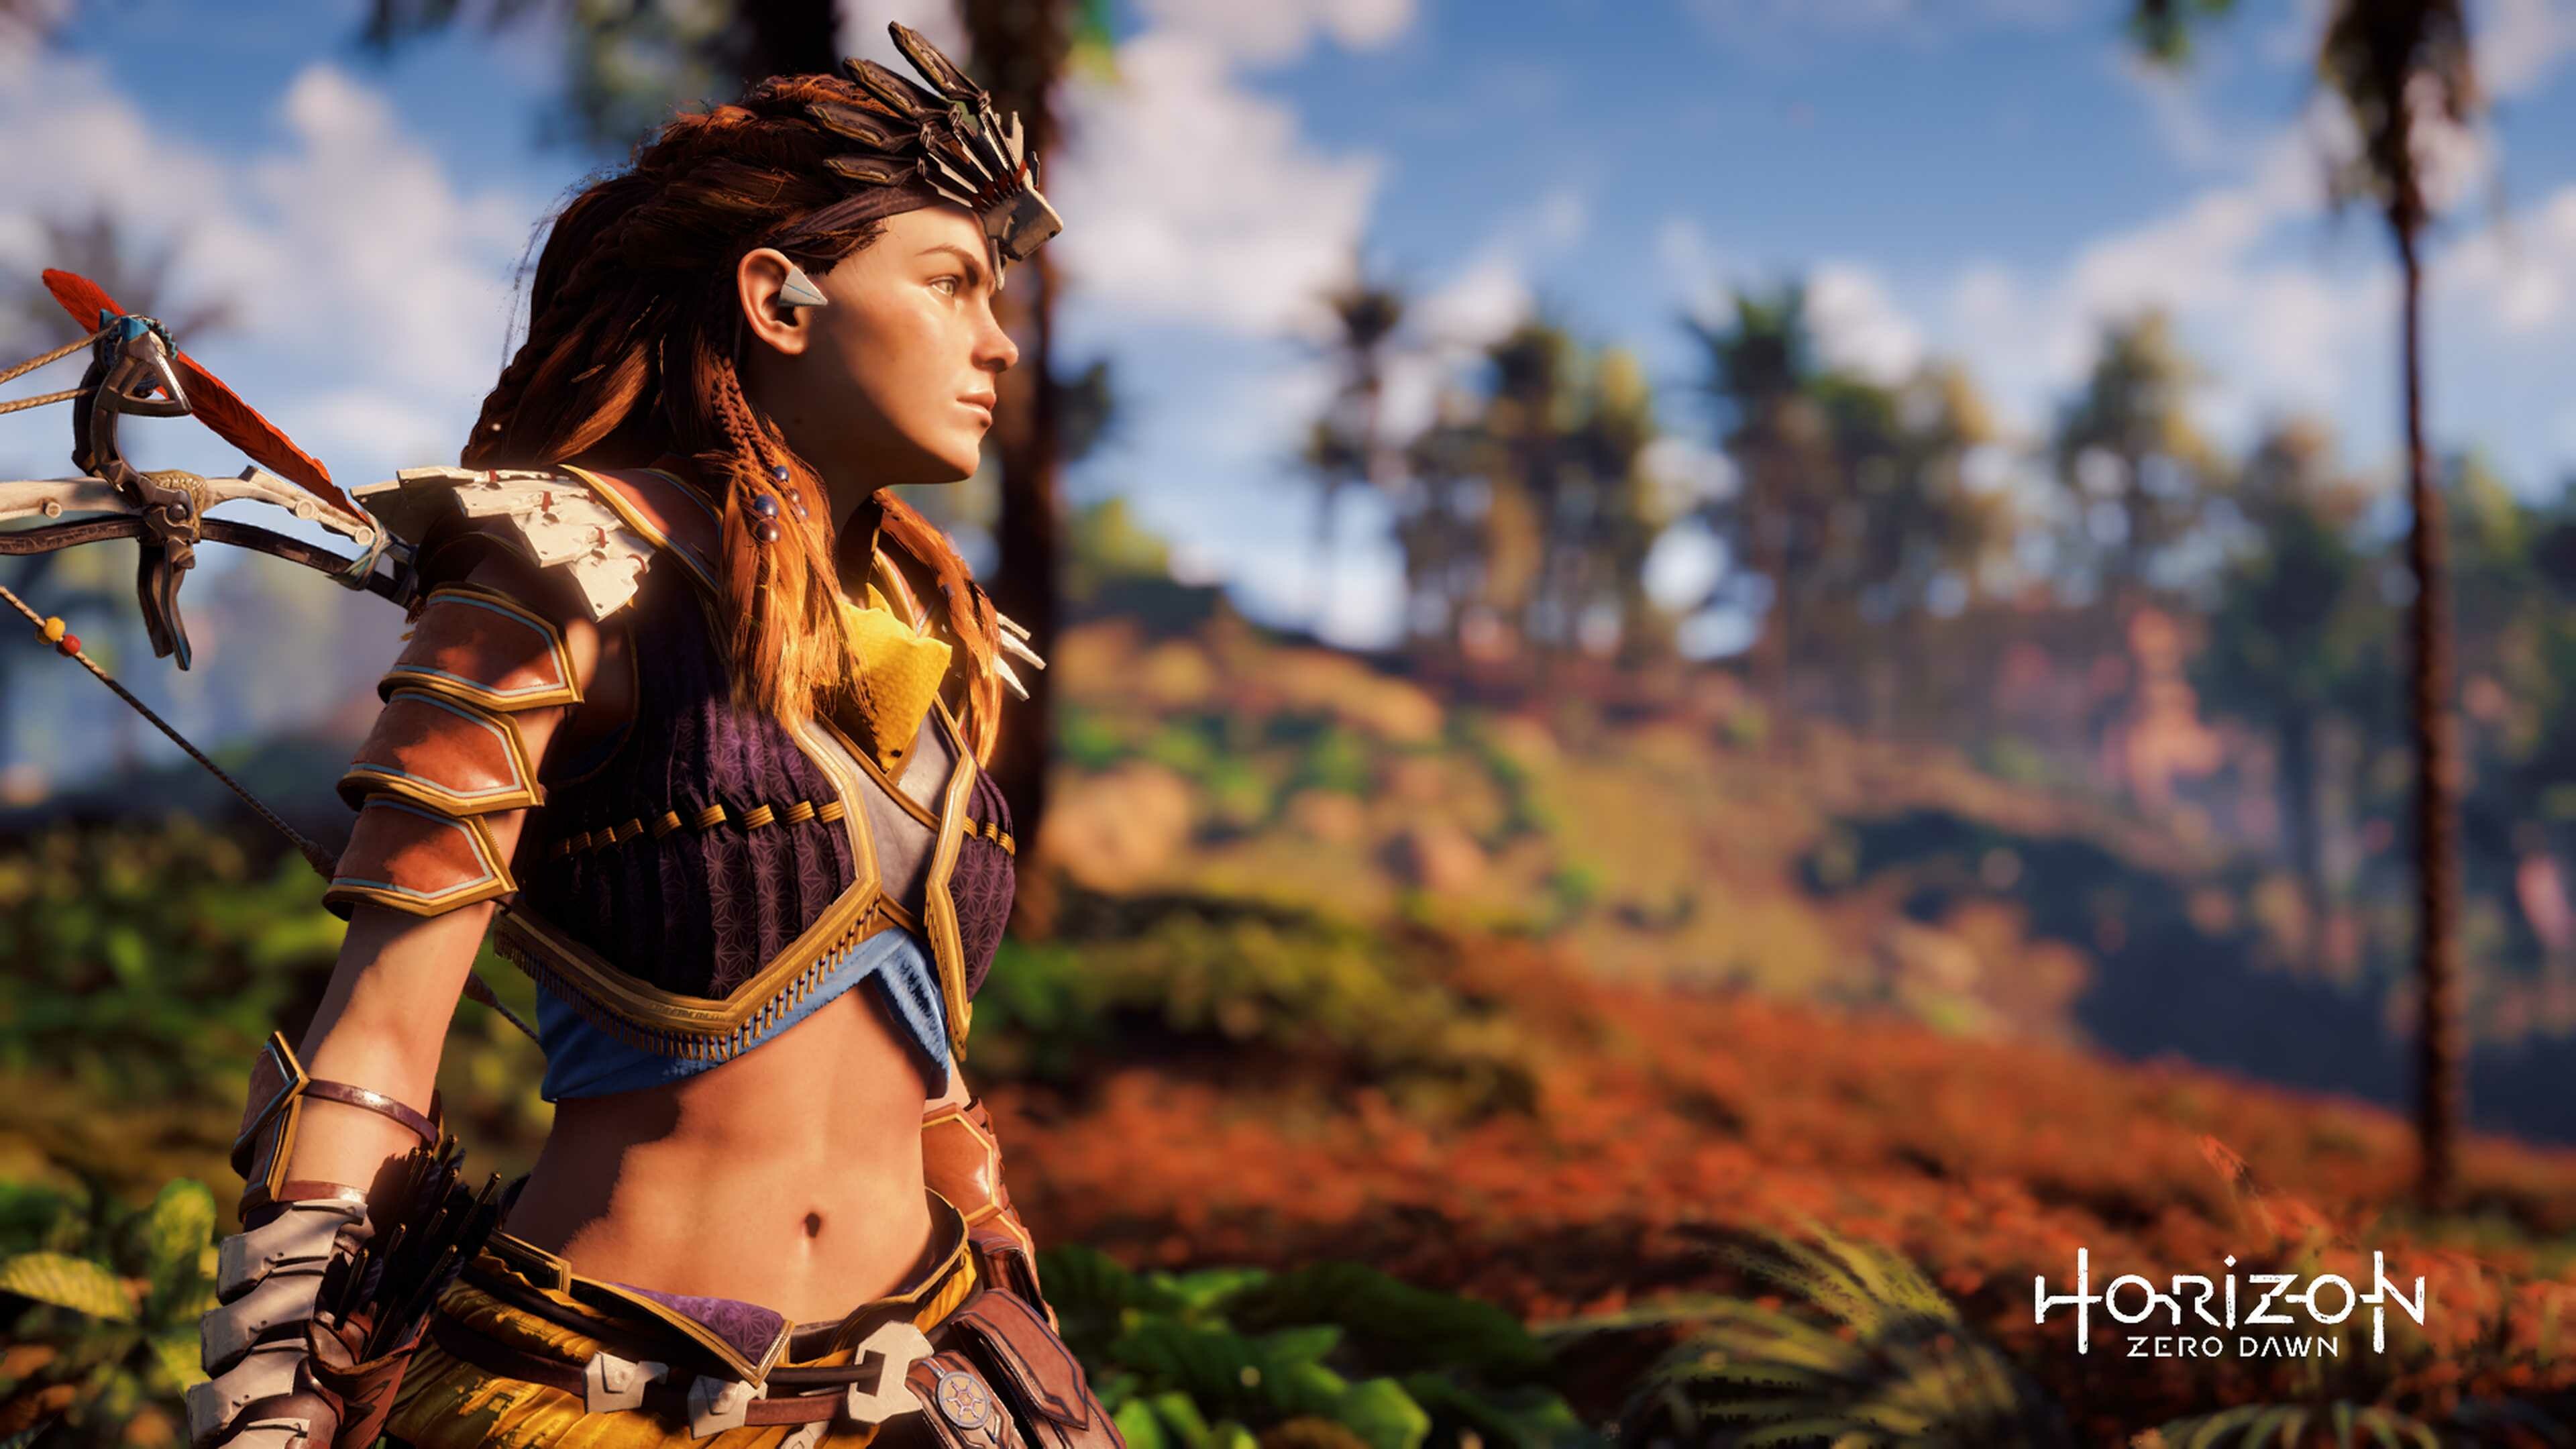 Horizon Zero Dawn: Aloy, A fictional character and protagonist of the 2017 video game. 3840x2160 4K Background.